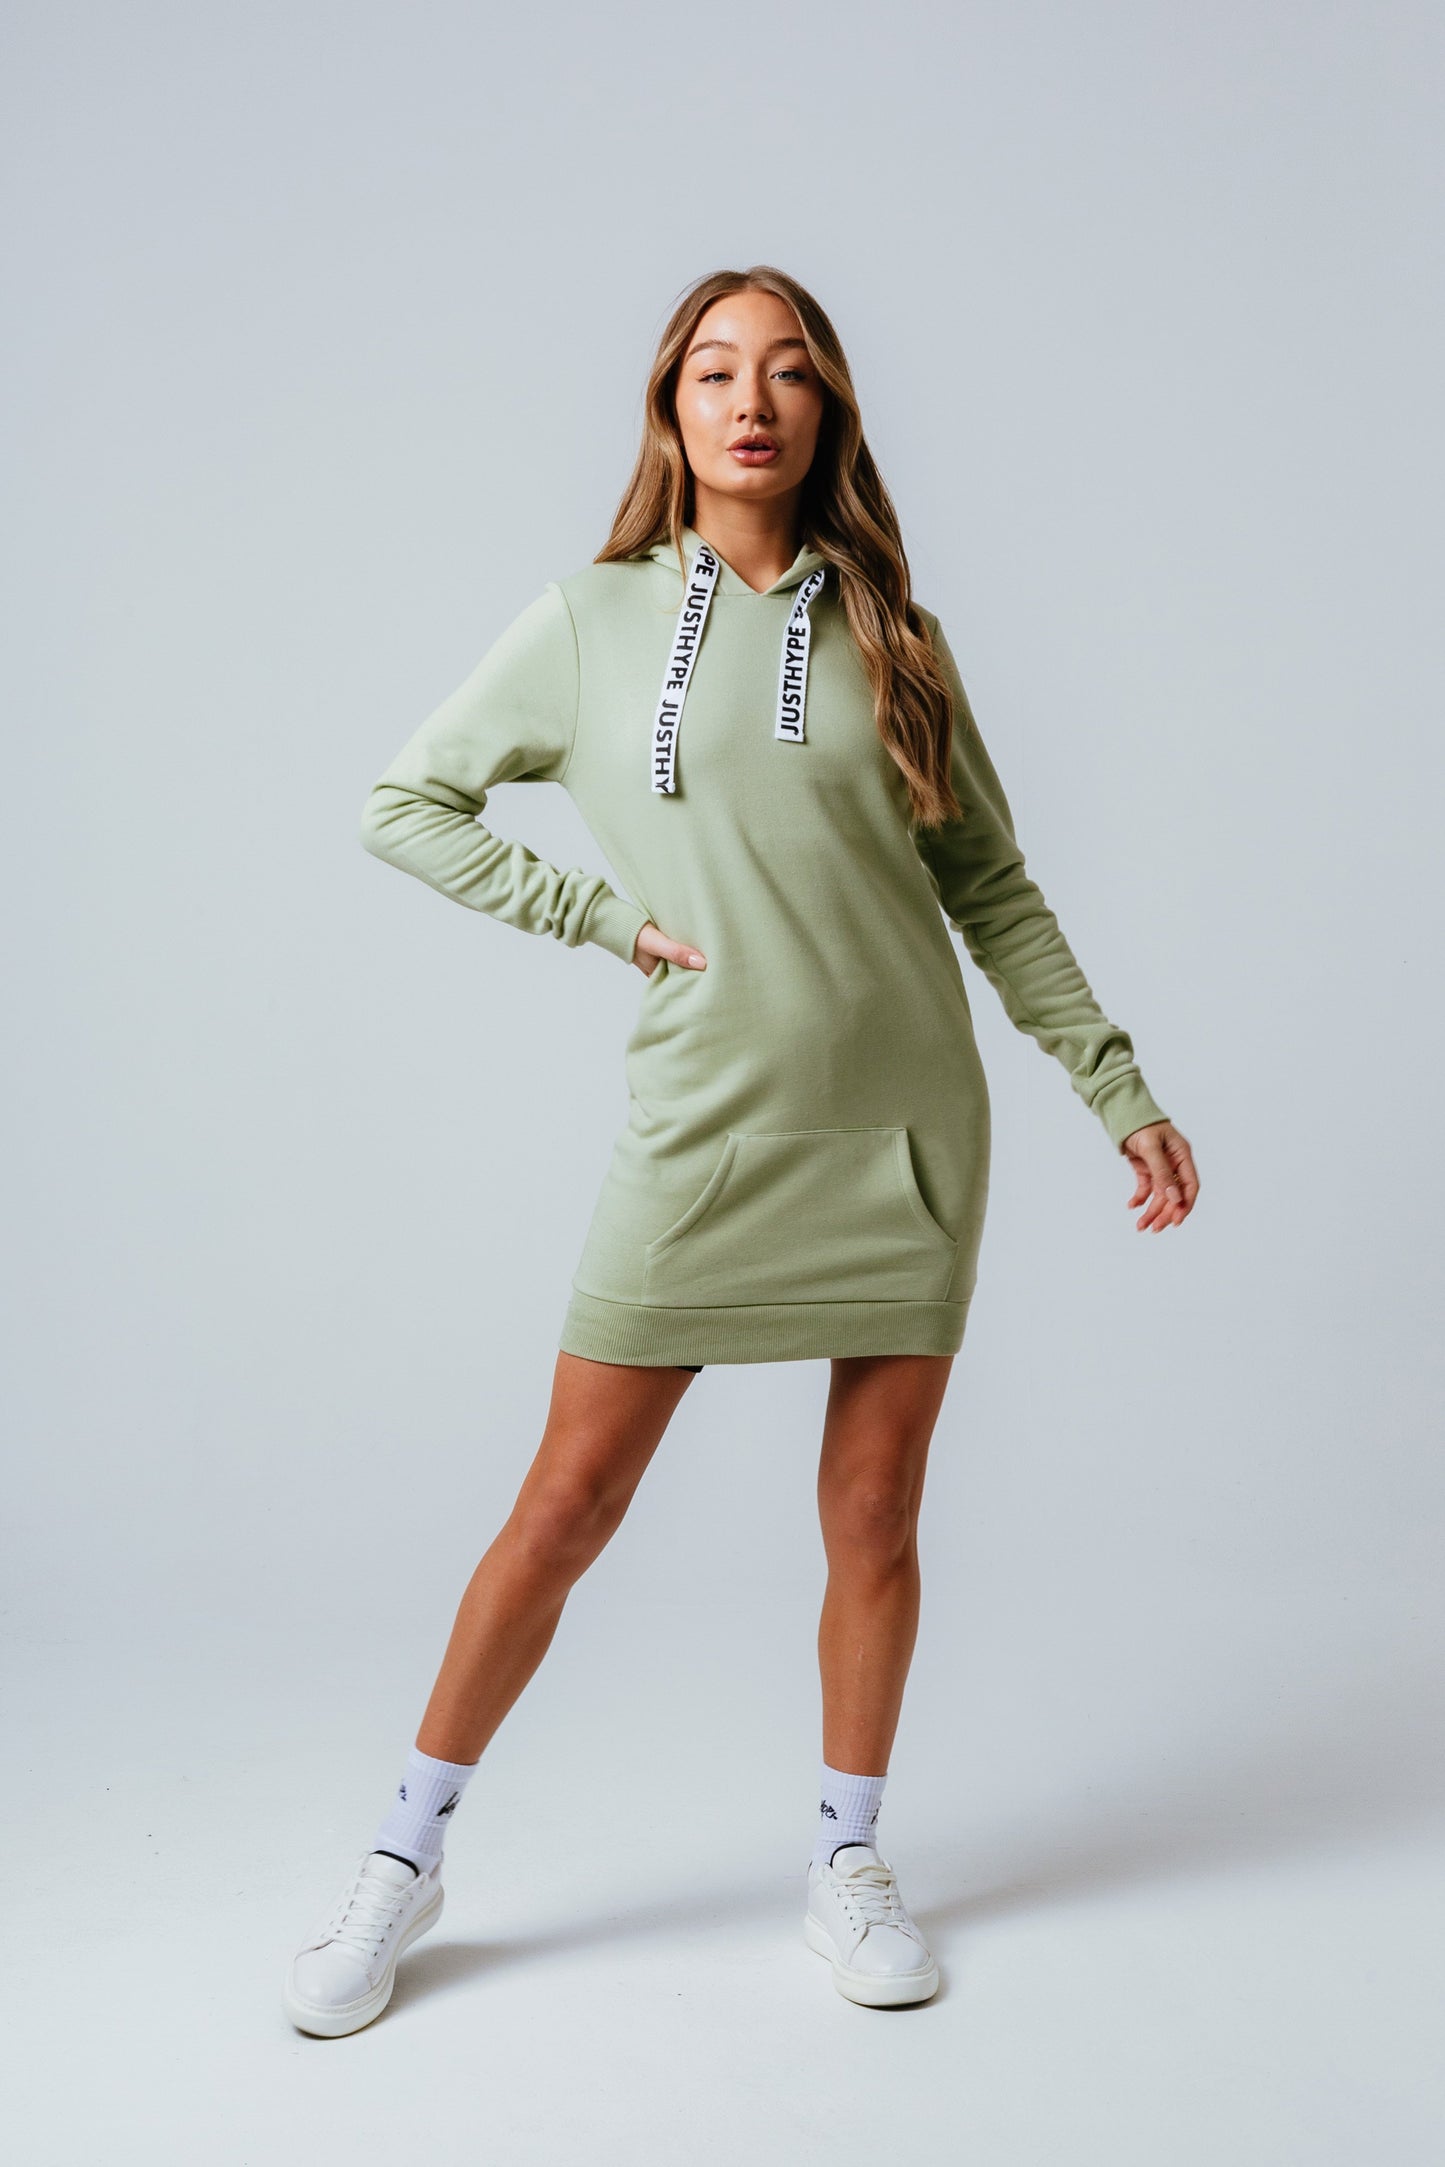 HYPE OLIVE WOMEN'S PULLOVER HOODIE DRESS